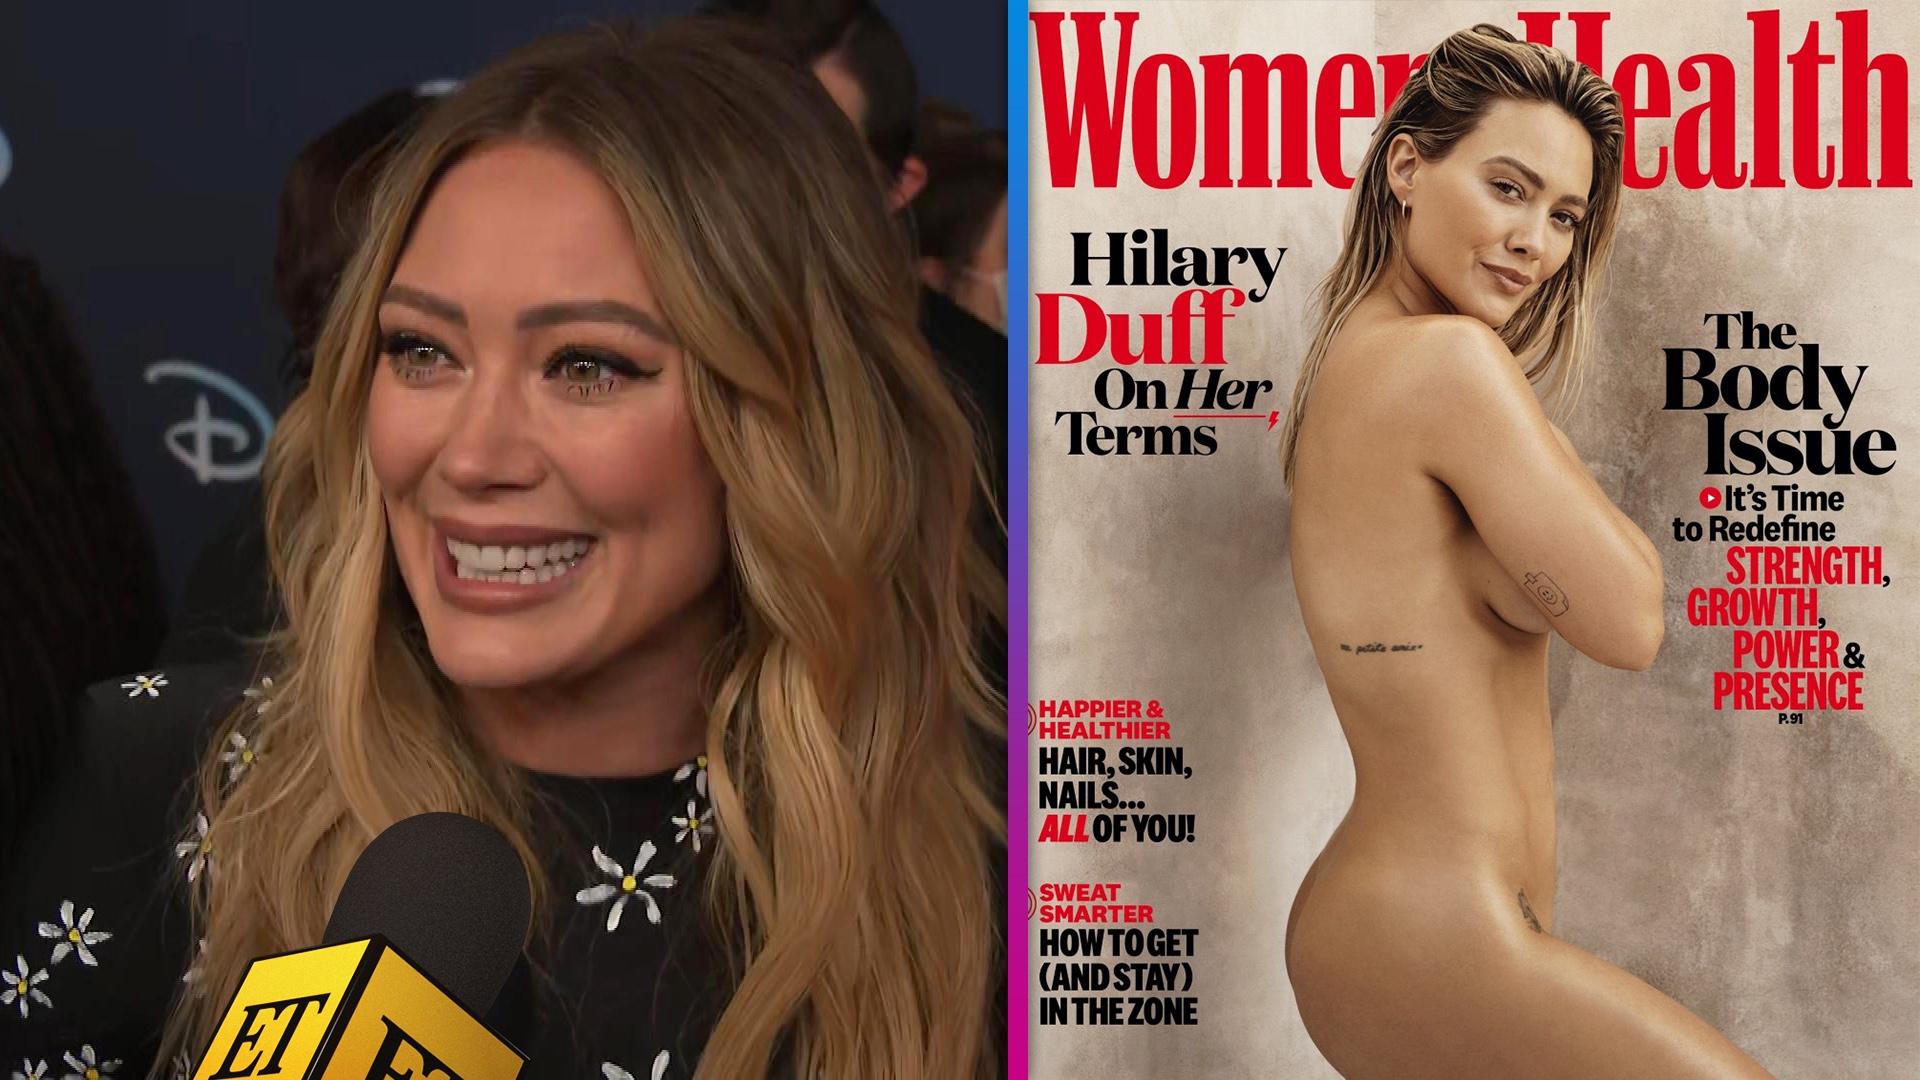 Hilary Duff Reveals Why It Was Scary to Pose Nude for Magazine Cover Shoot (Exclusive) Entertainment Tonight